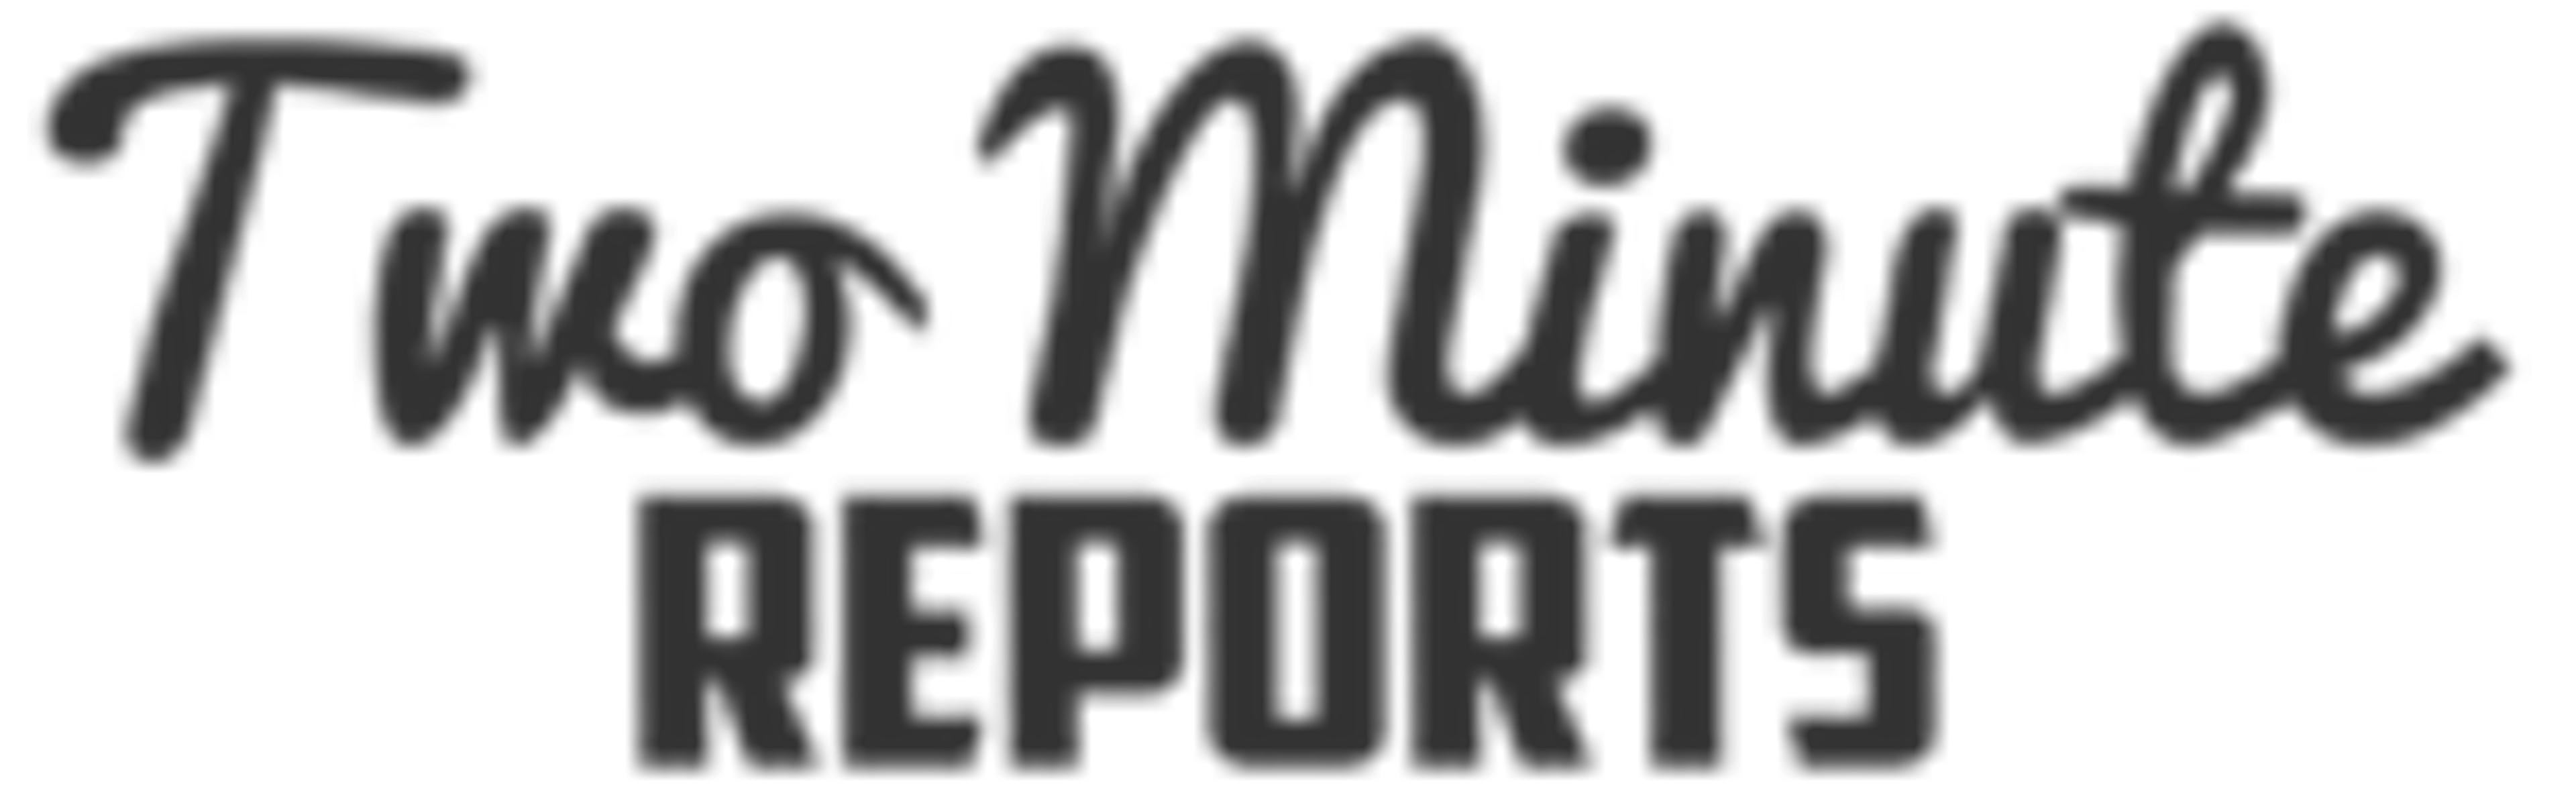 Two Minute Reports Logo